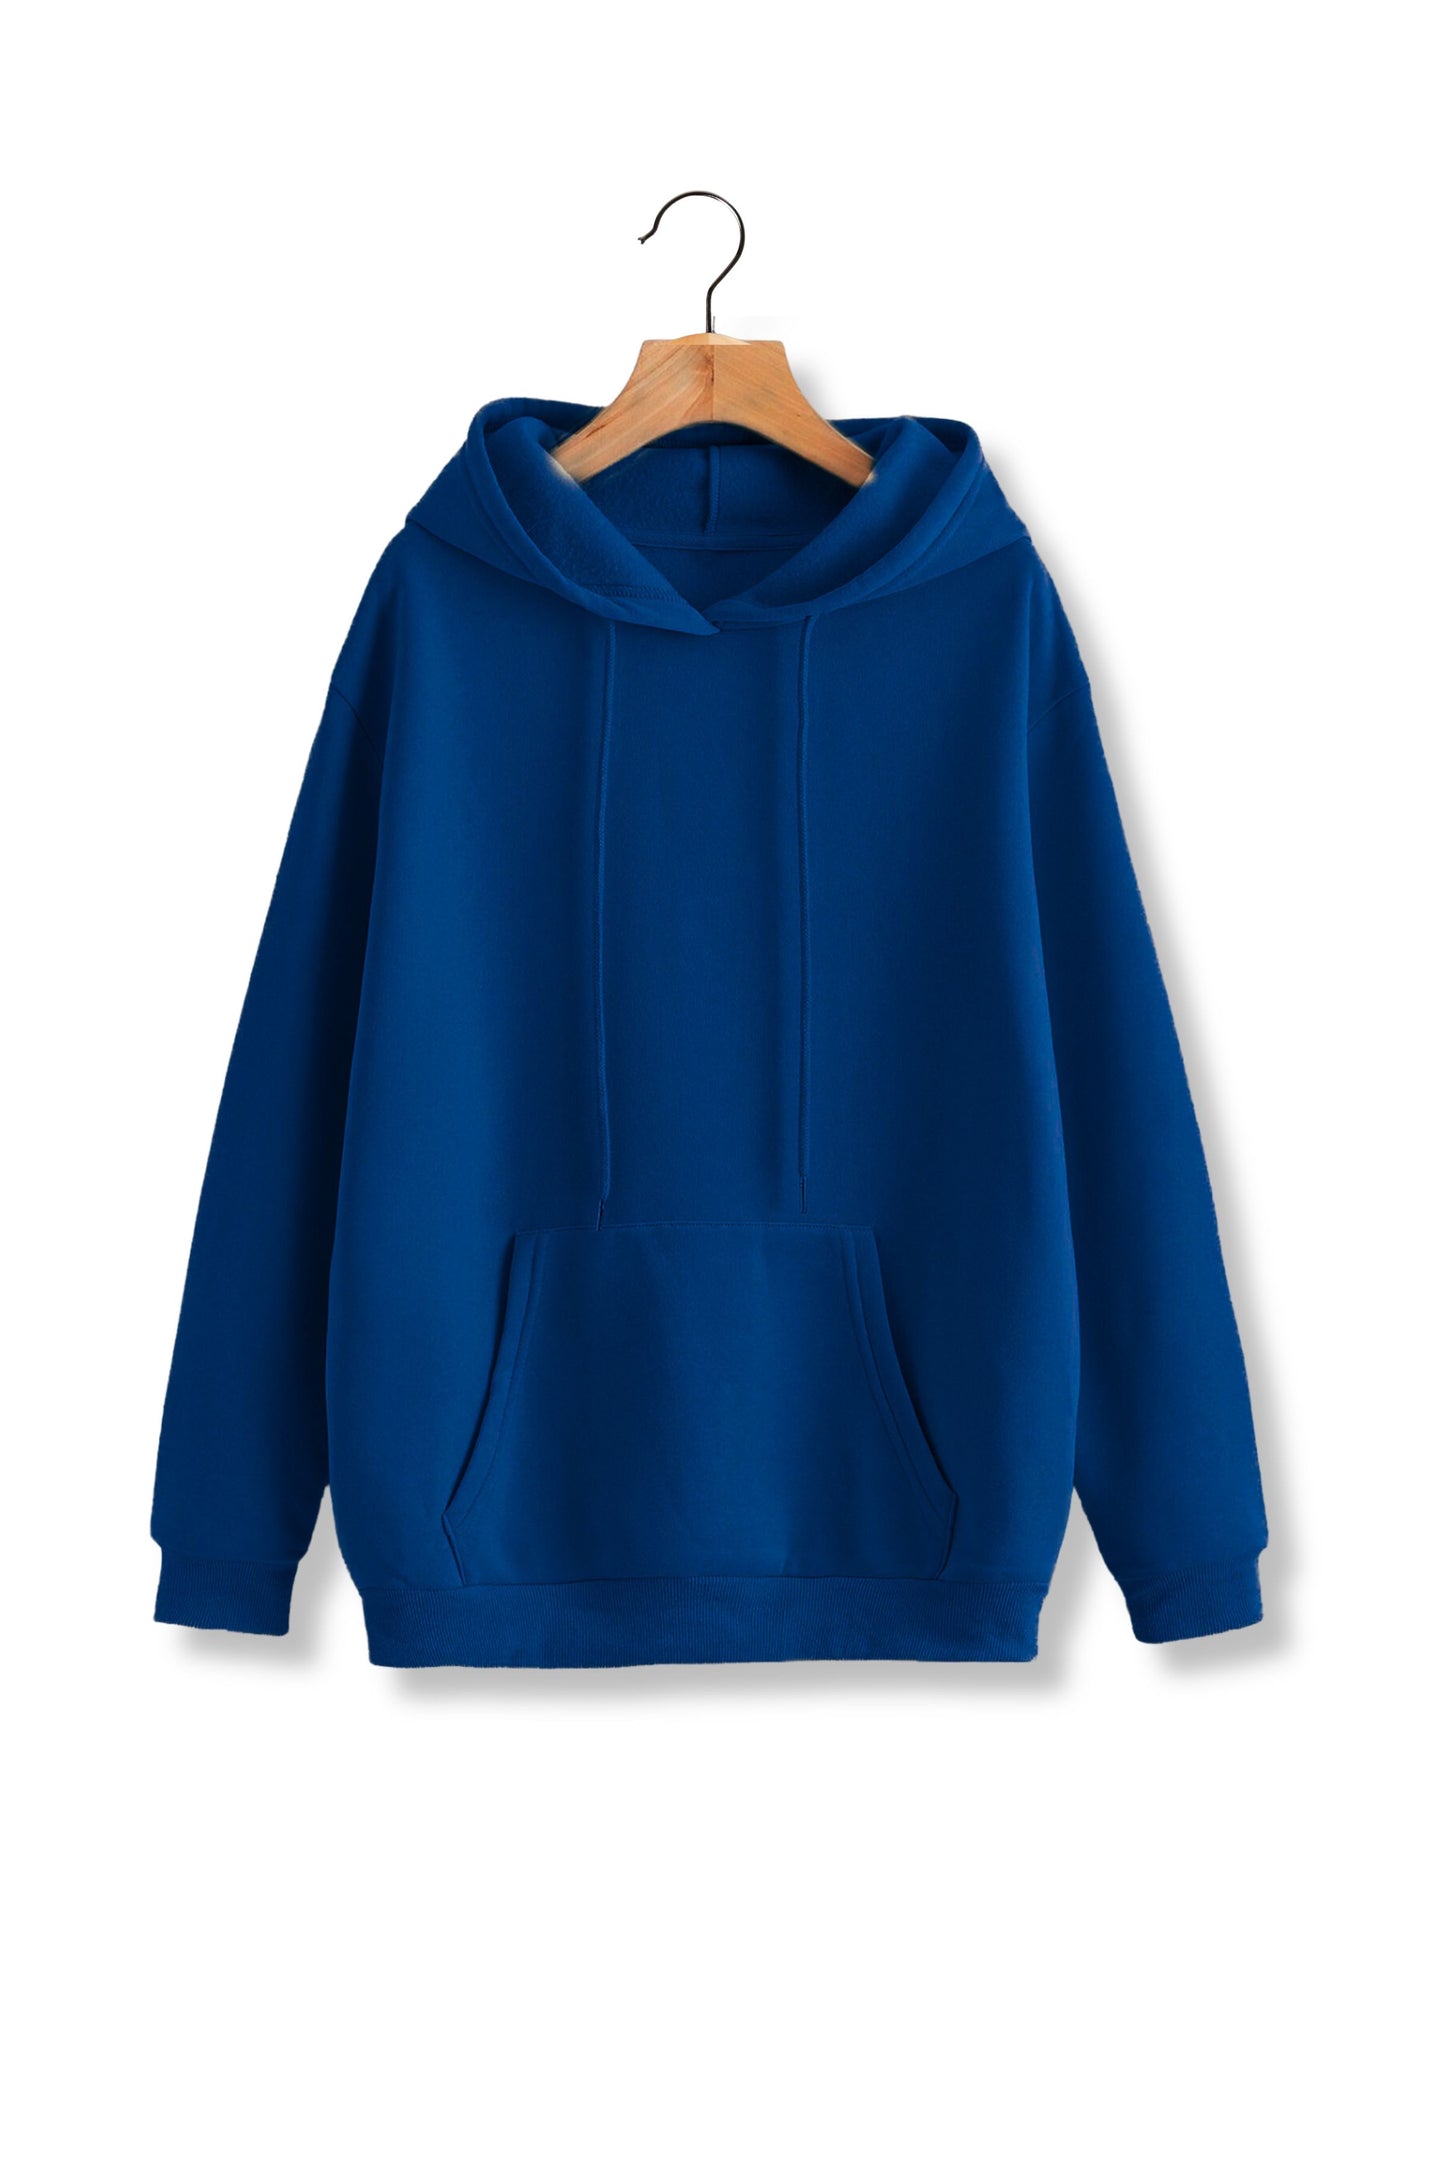 Unisex French Terry Hoodies - Blue